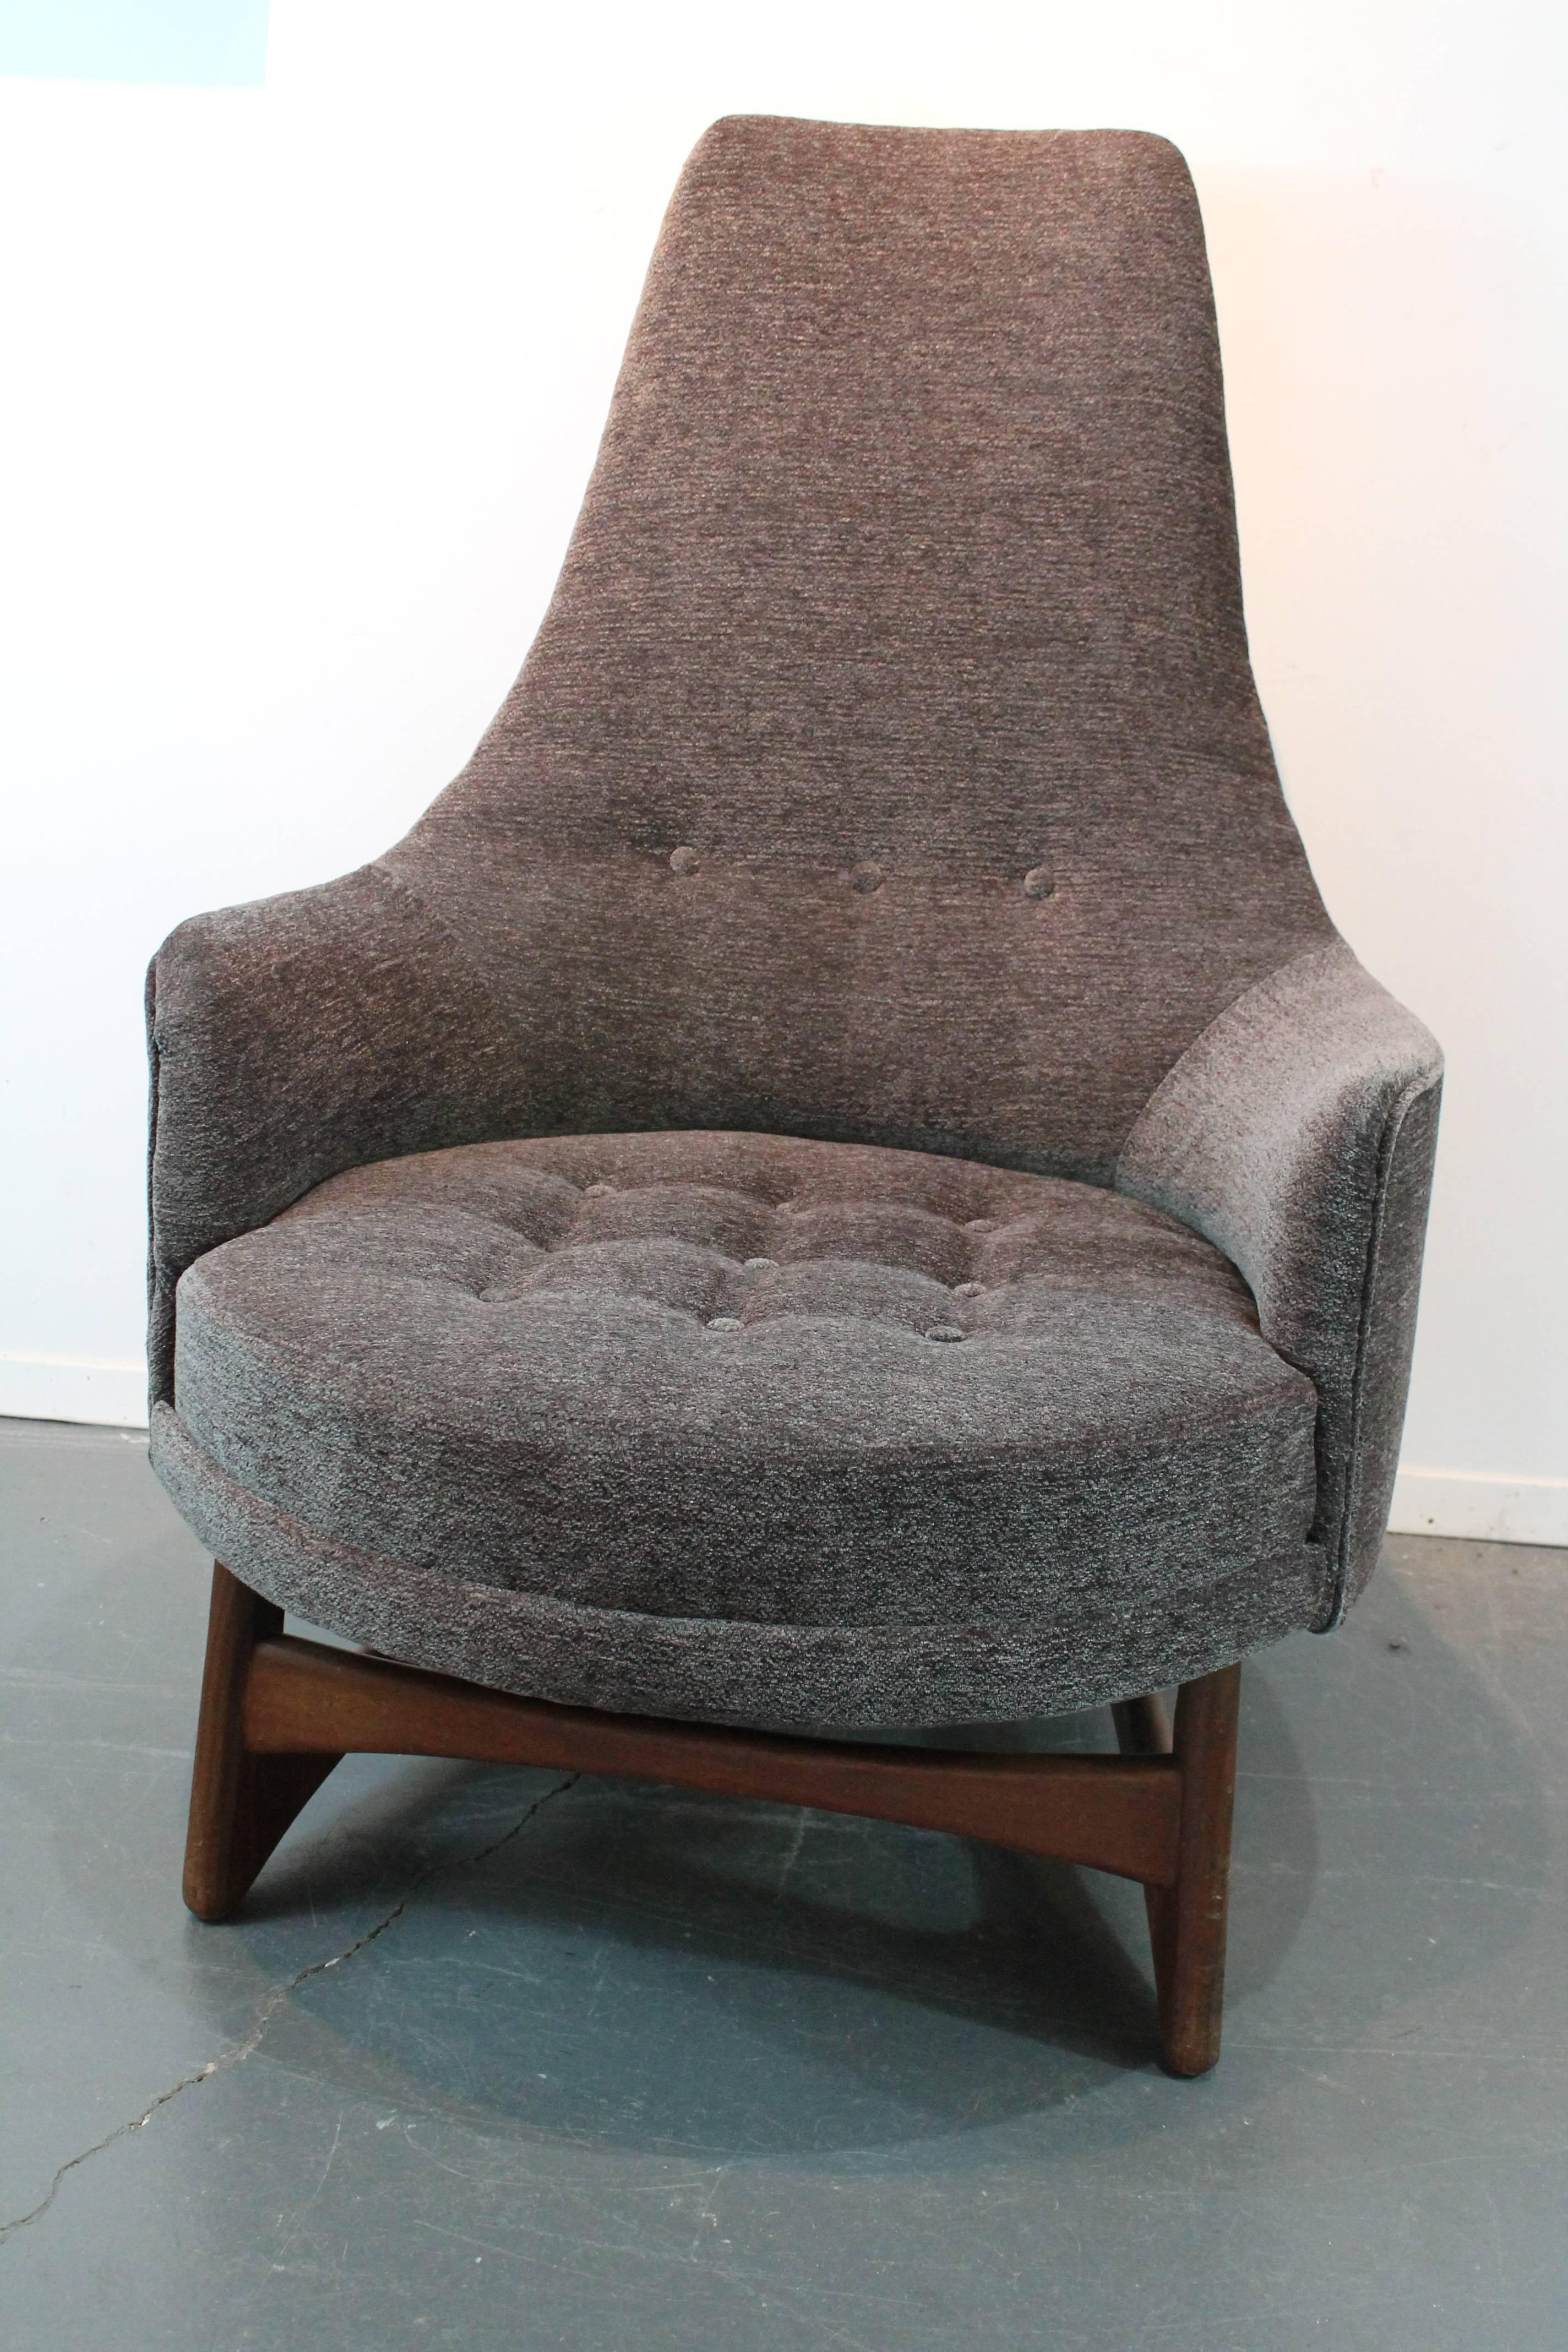 Sculptural newly reupholstered walnut based high backed lounge chair designed by Adrian Pearsall.